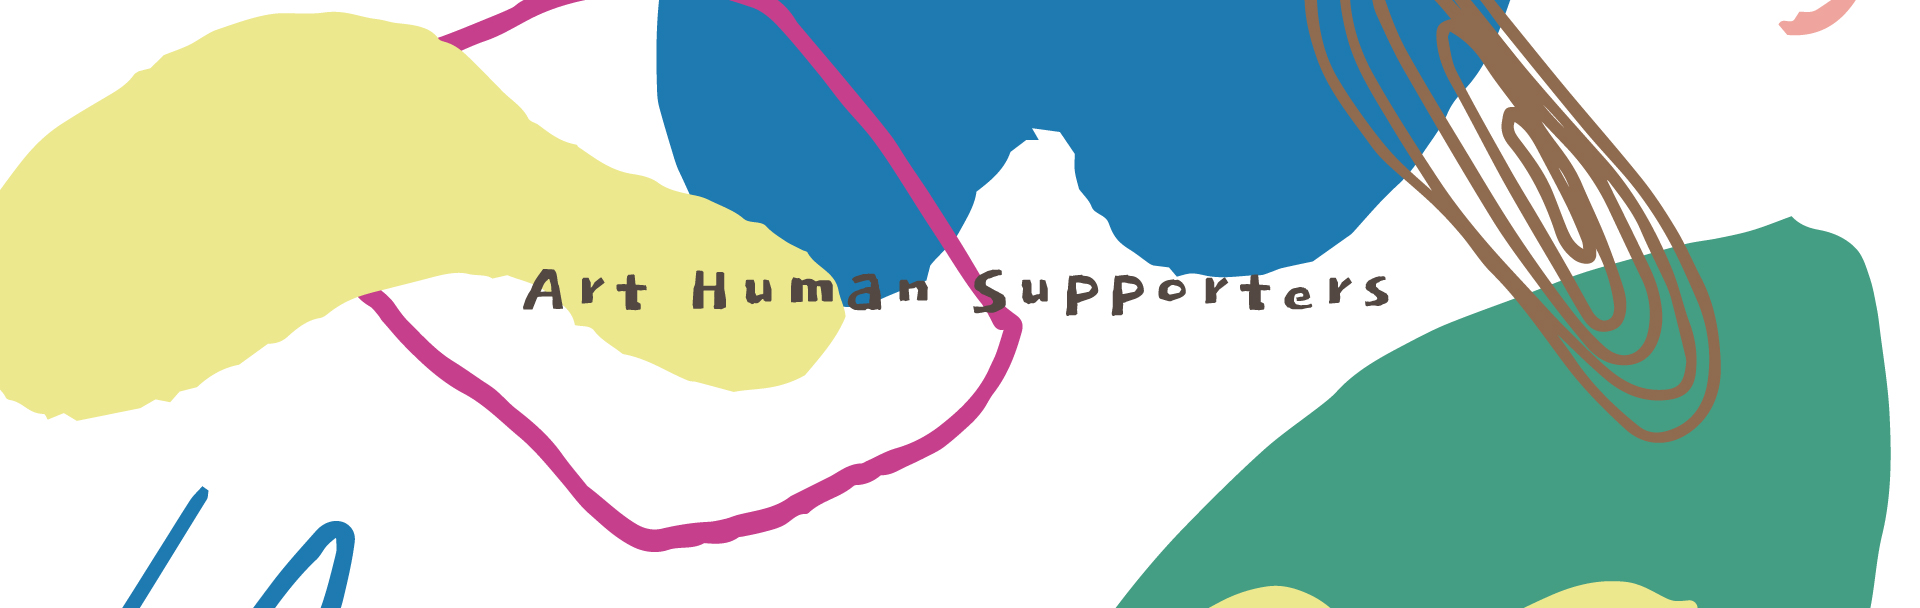 Art Human Supporters